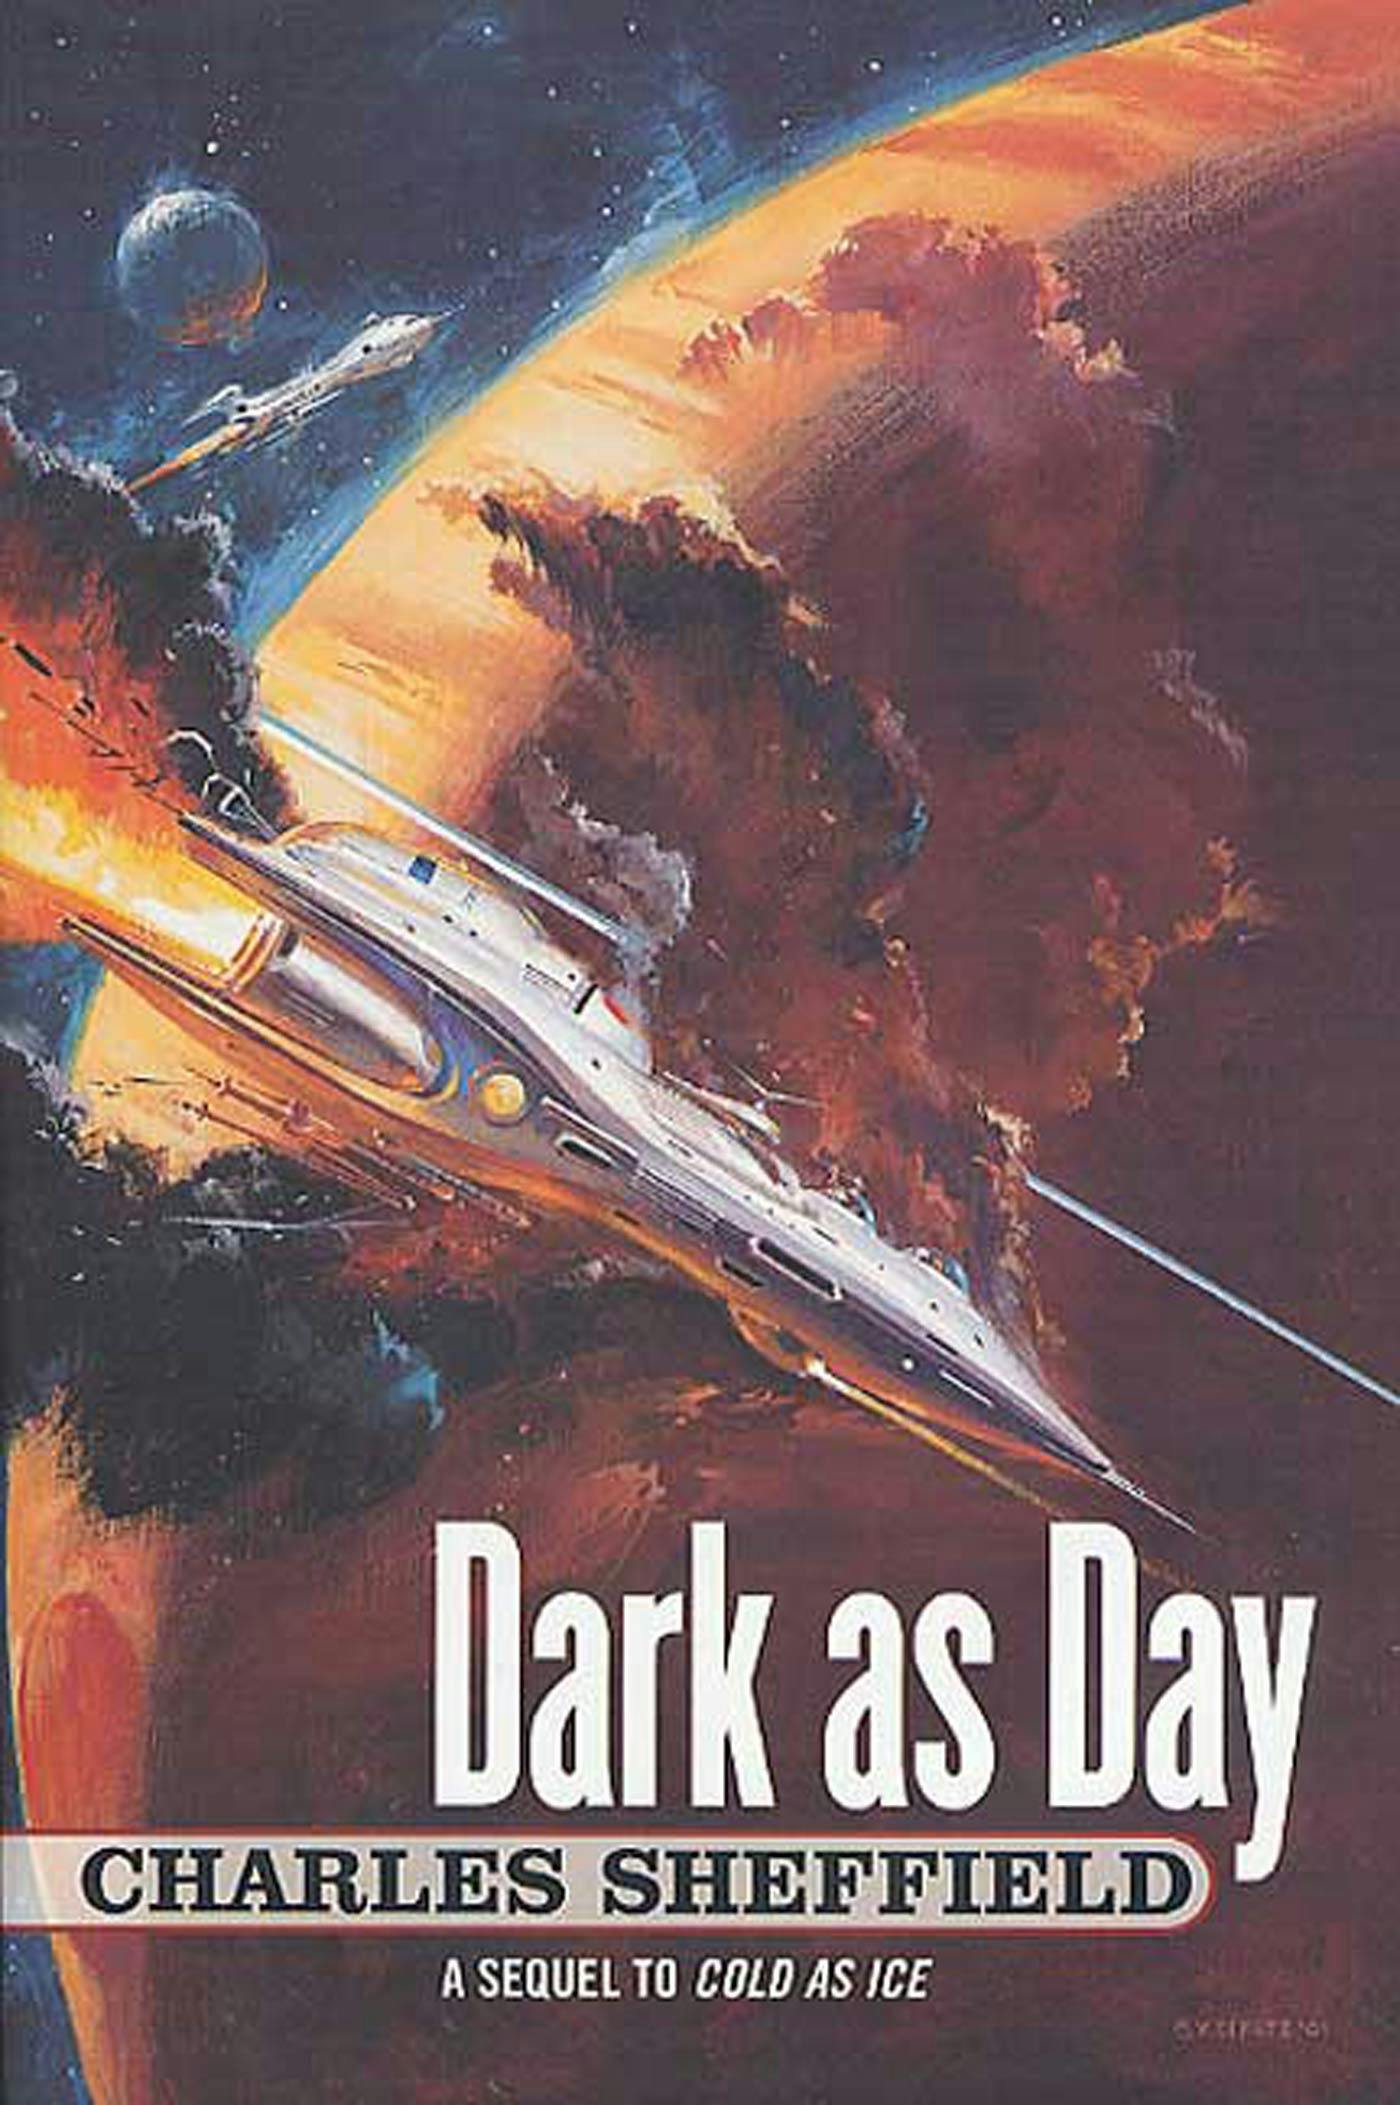 Cover for the book titled as: Dark as Day